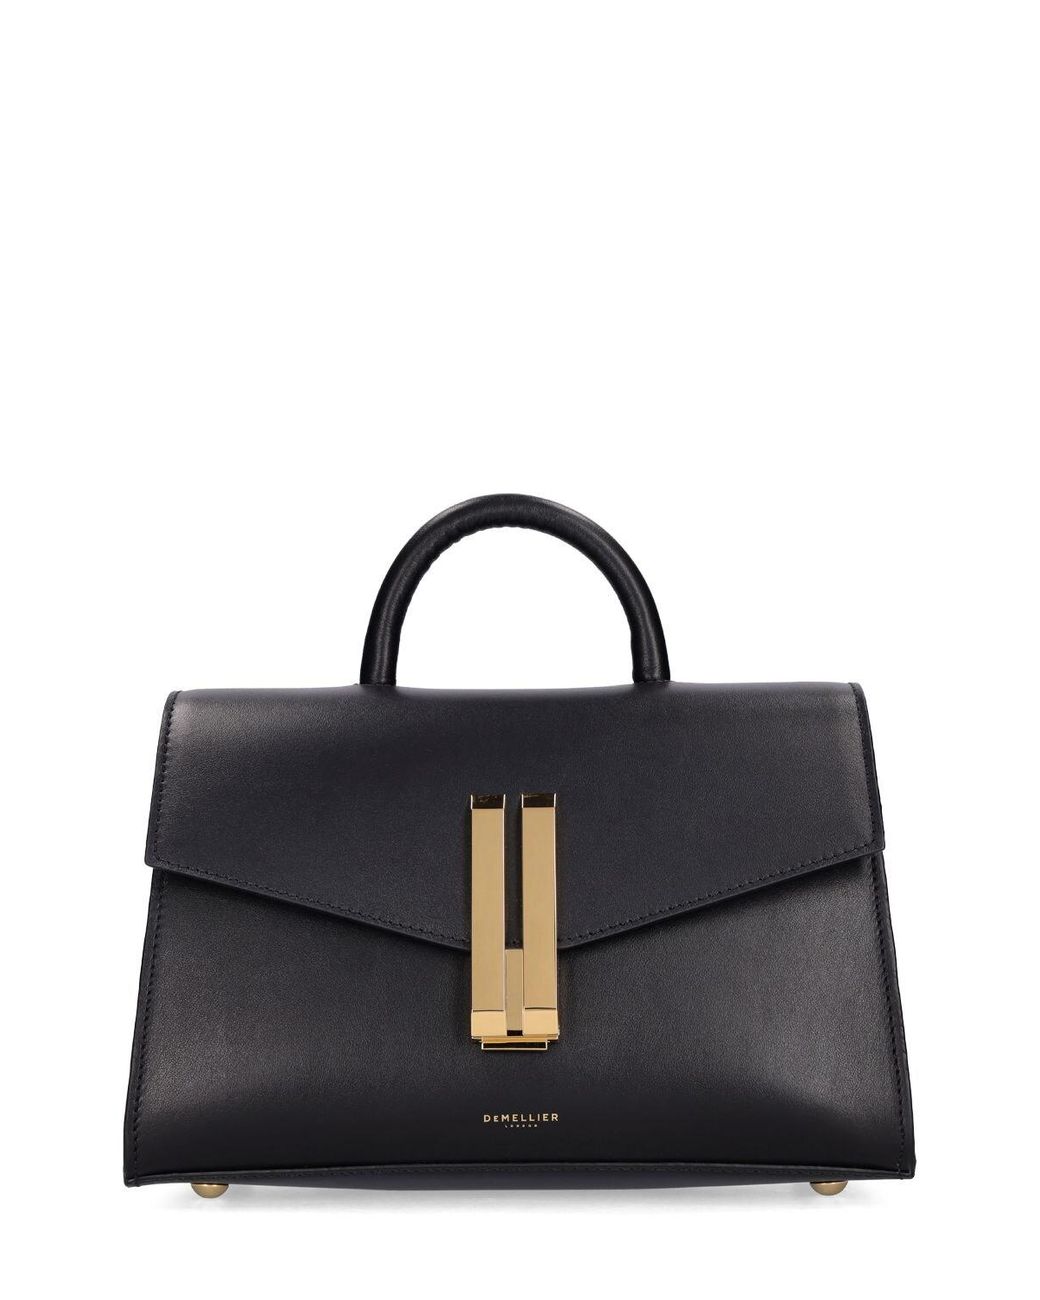 DeMellier Midi Montreal Smooth Leather Bag in Black | Lyst UK